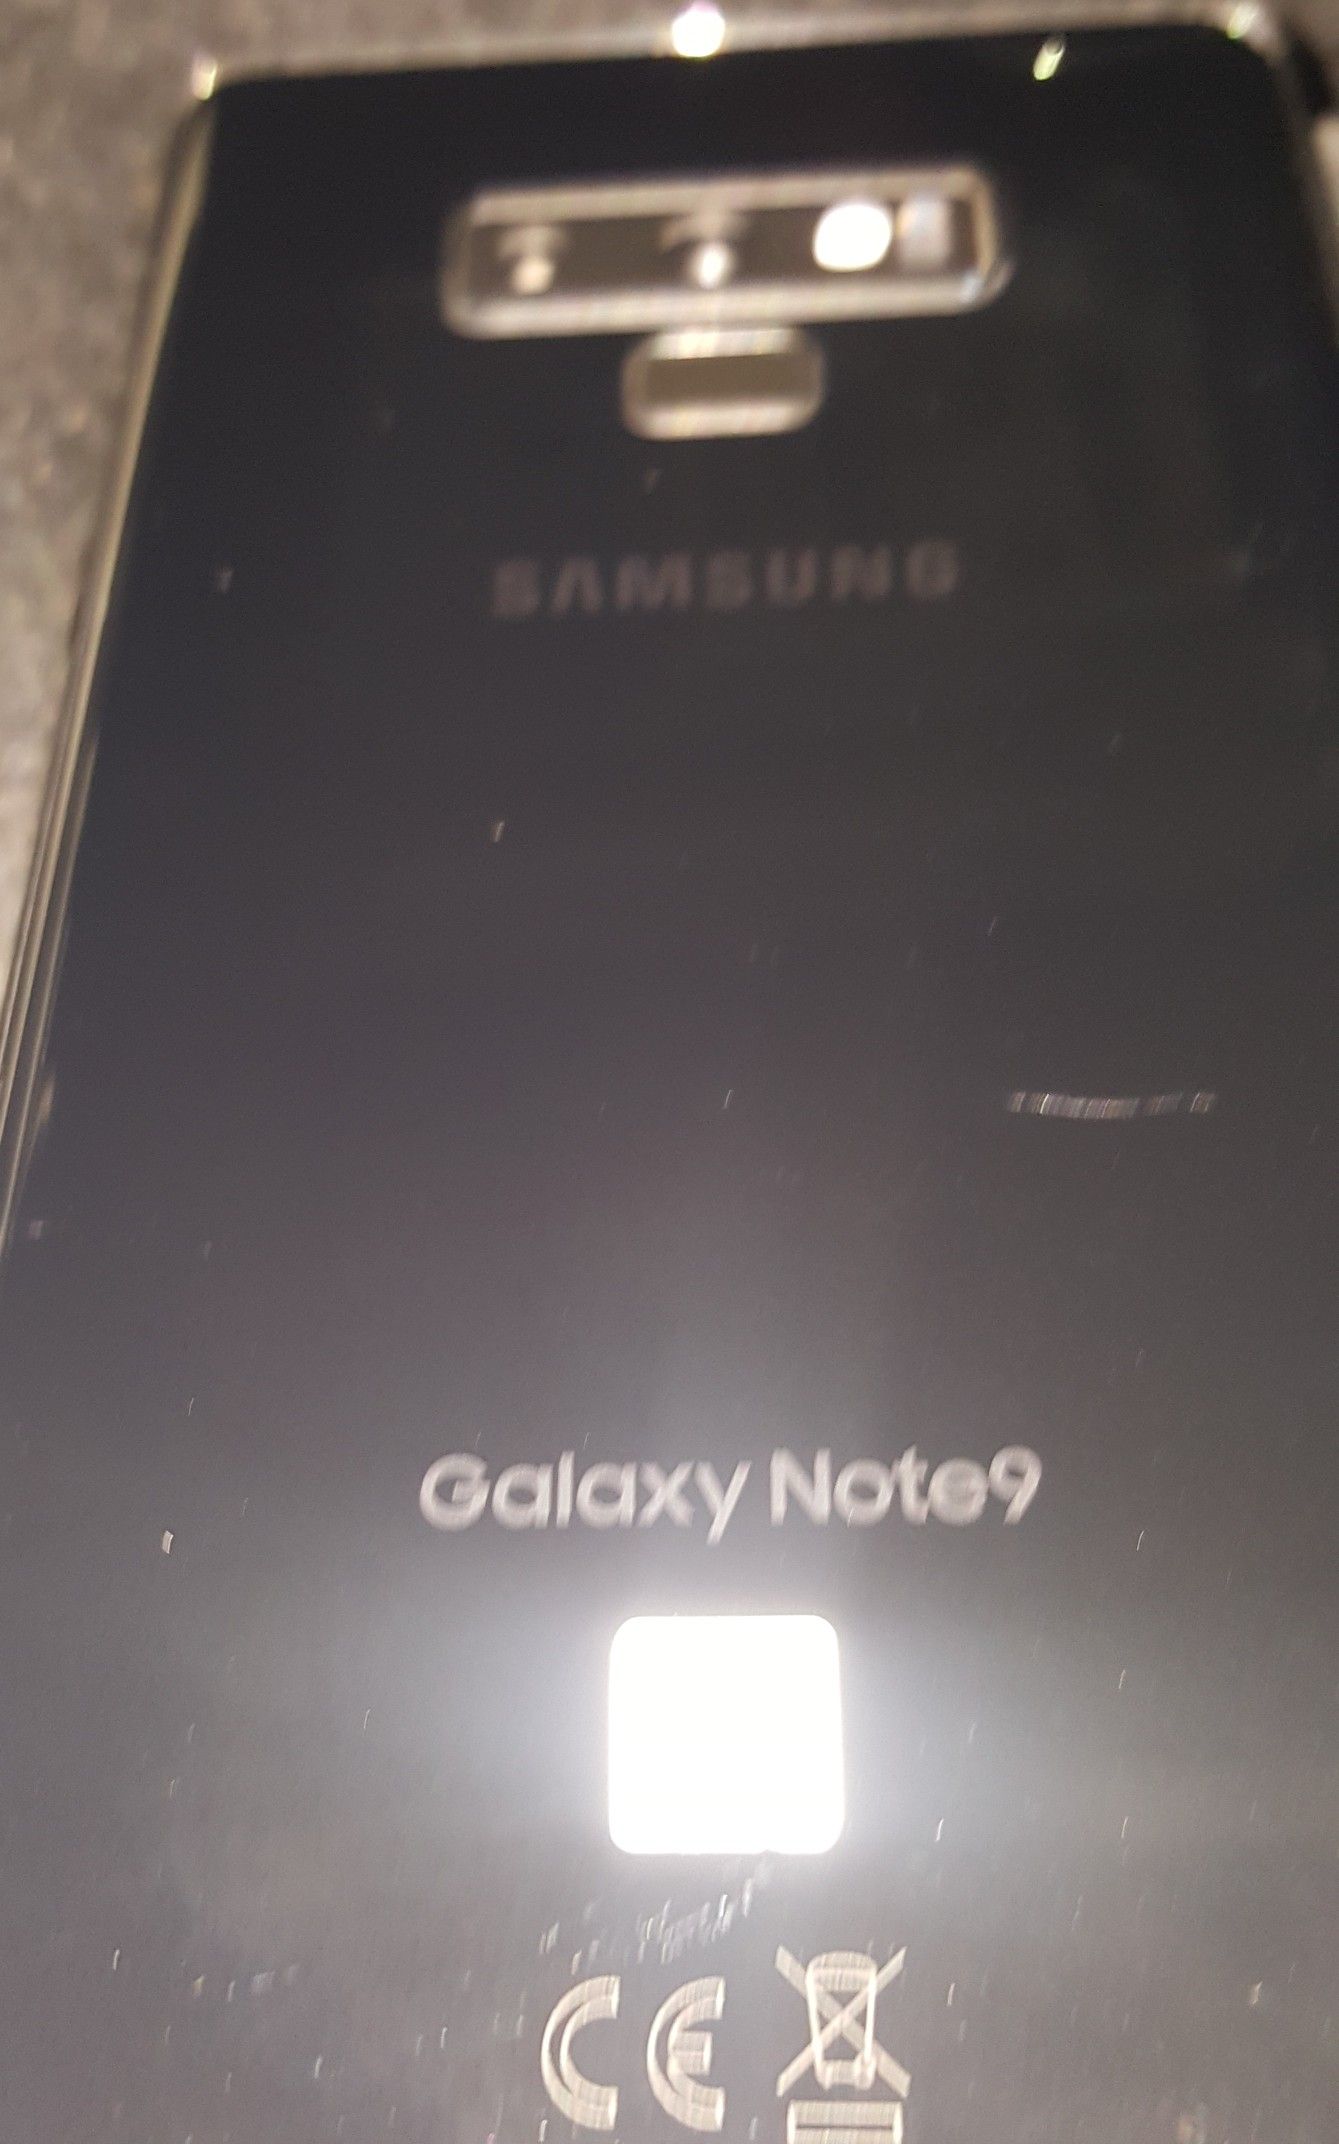 **SAMSUNG GALAXY PHONE** Samsung Galaxy Note 9 / 10 out of 10 condition no cracks or scratches / has fast charger / has pen / Verizon / Otter Box /